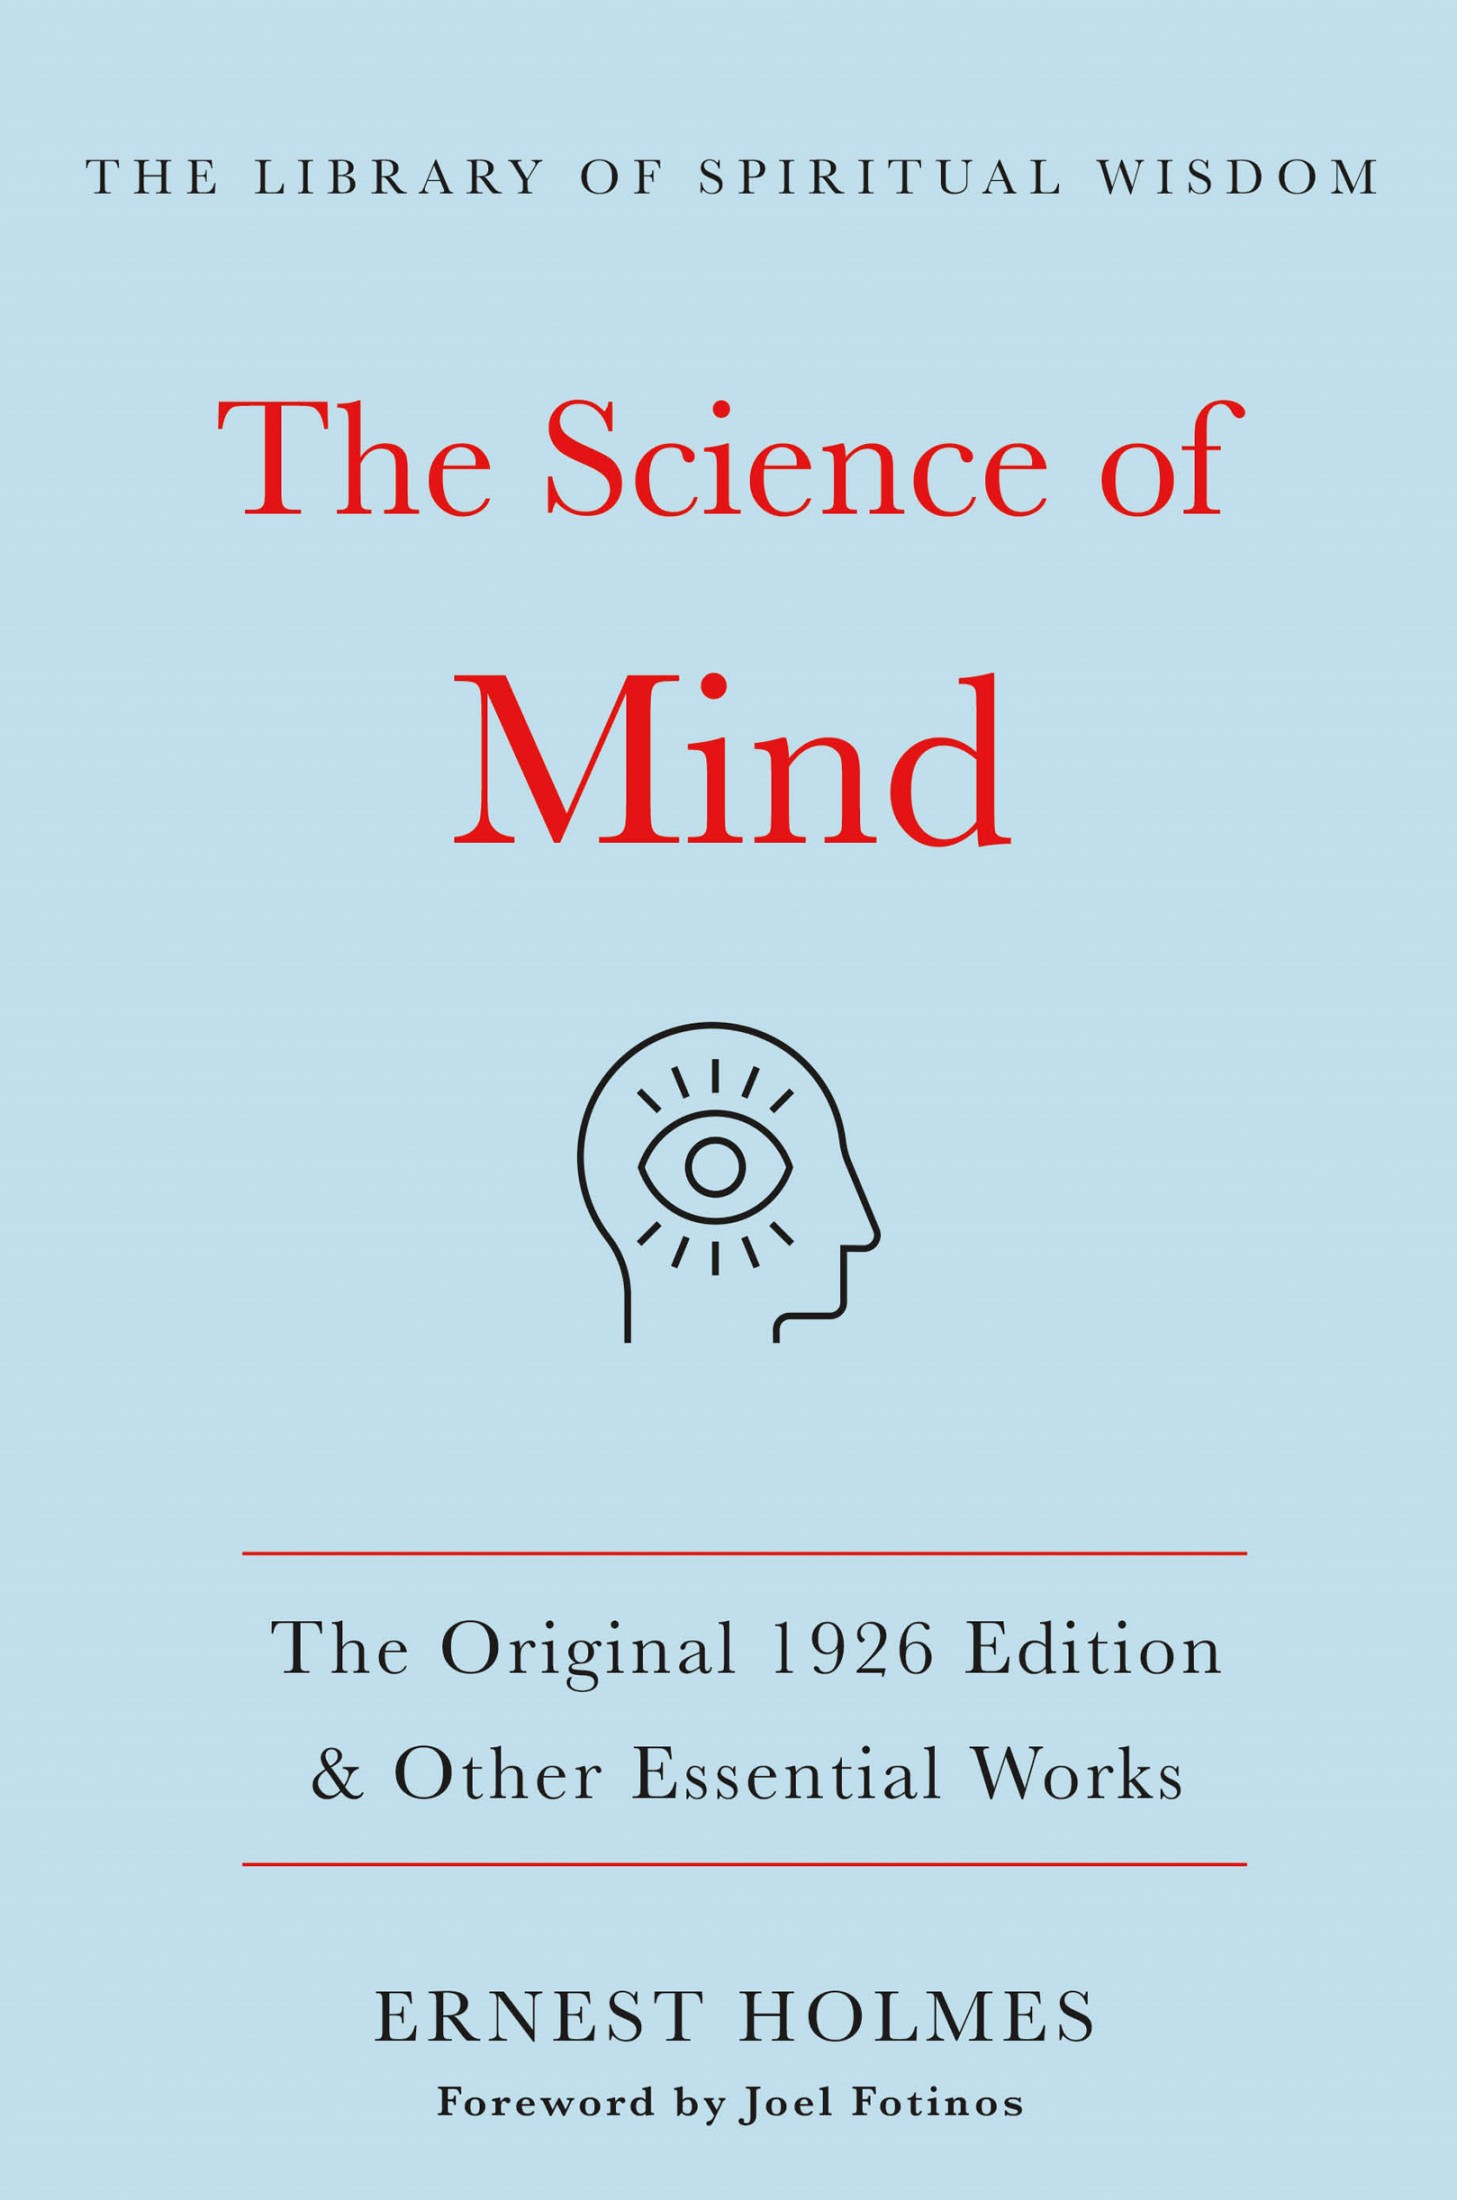 The Science of Mind: The Original 1926 Edition & Other Essential Works